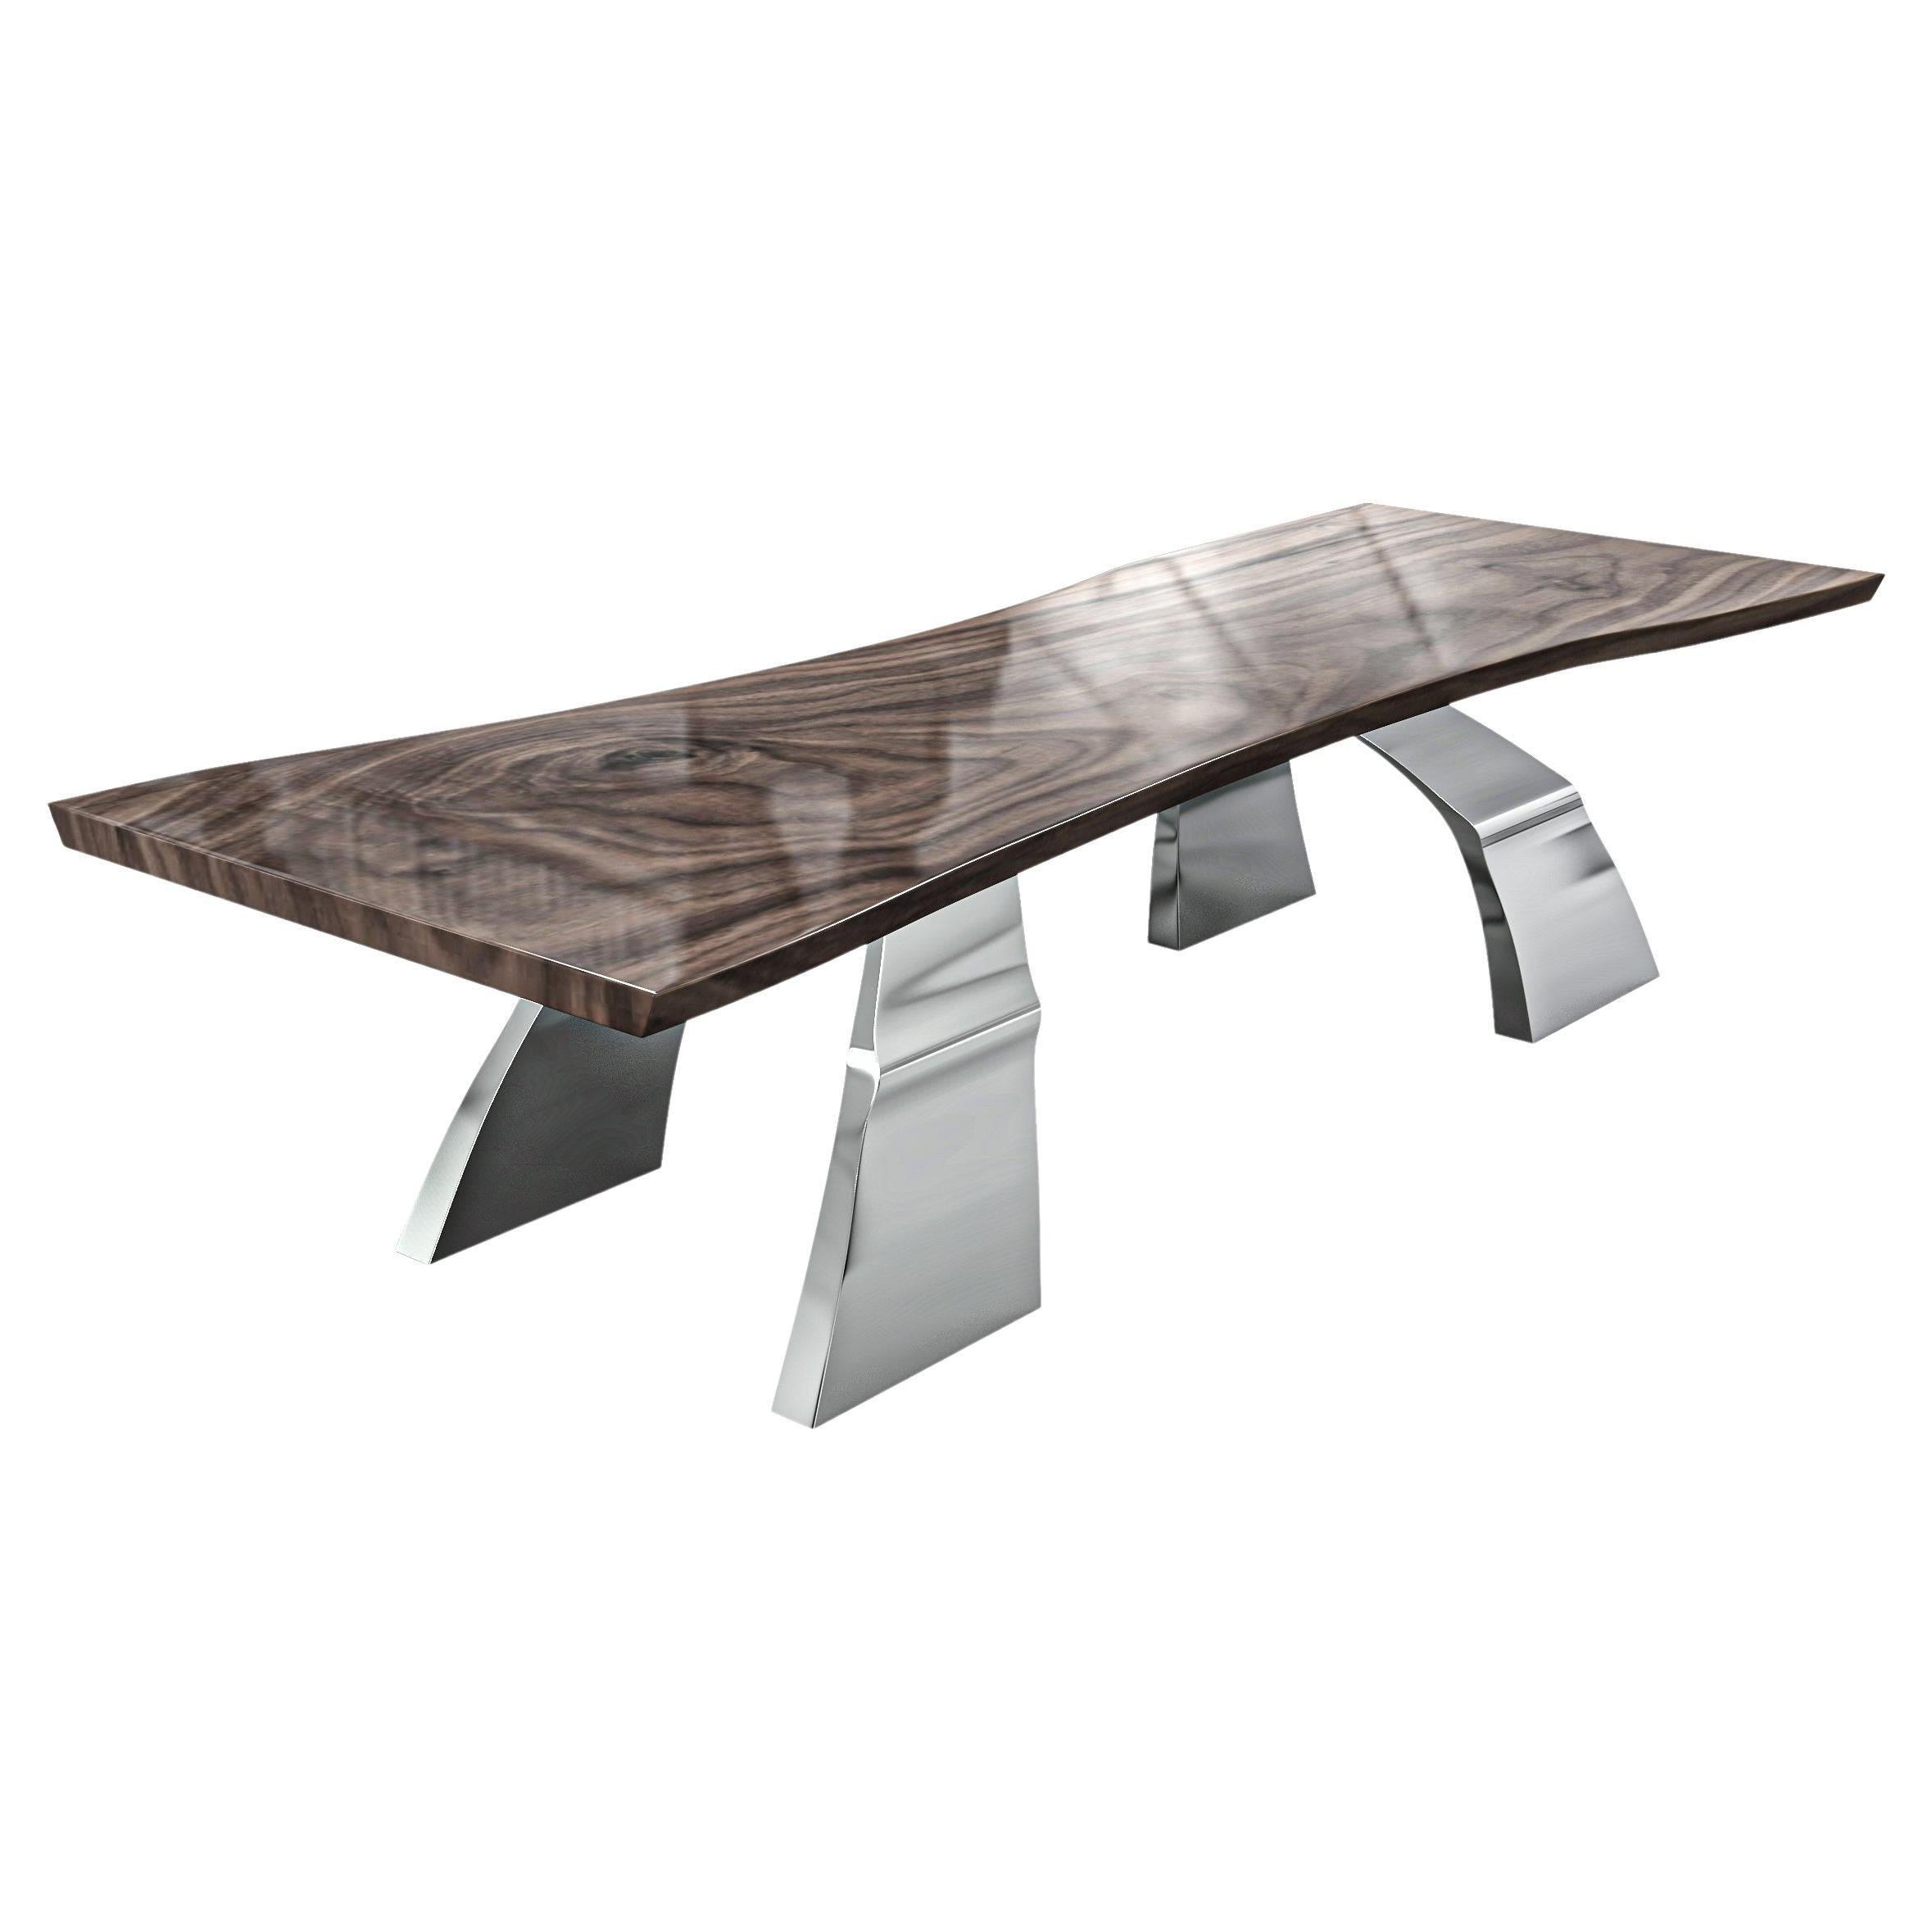 "Nuova Stradale" Dining Table with Stainless Steel and Walnut Top, Istanbul